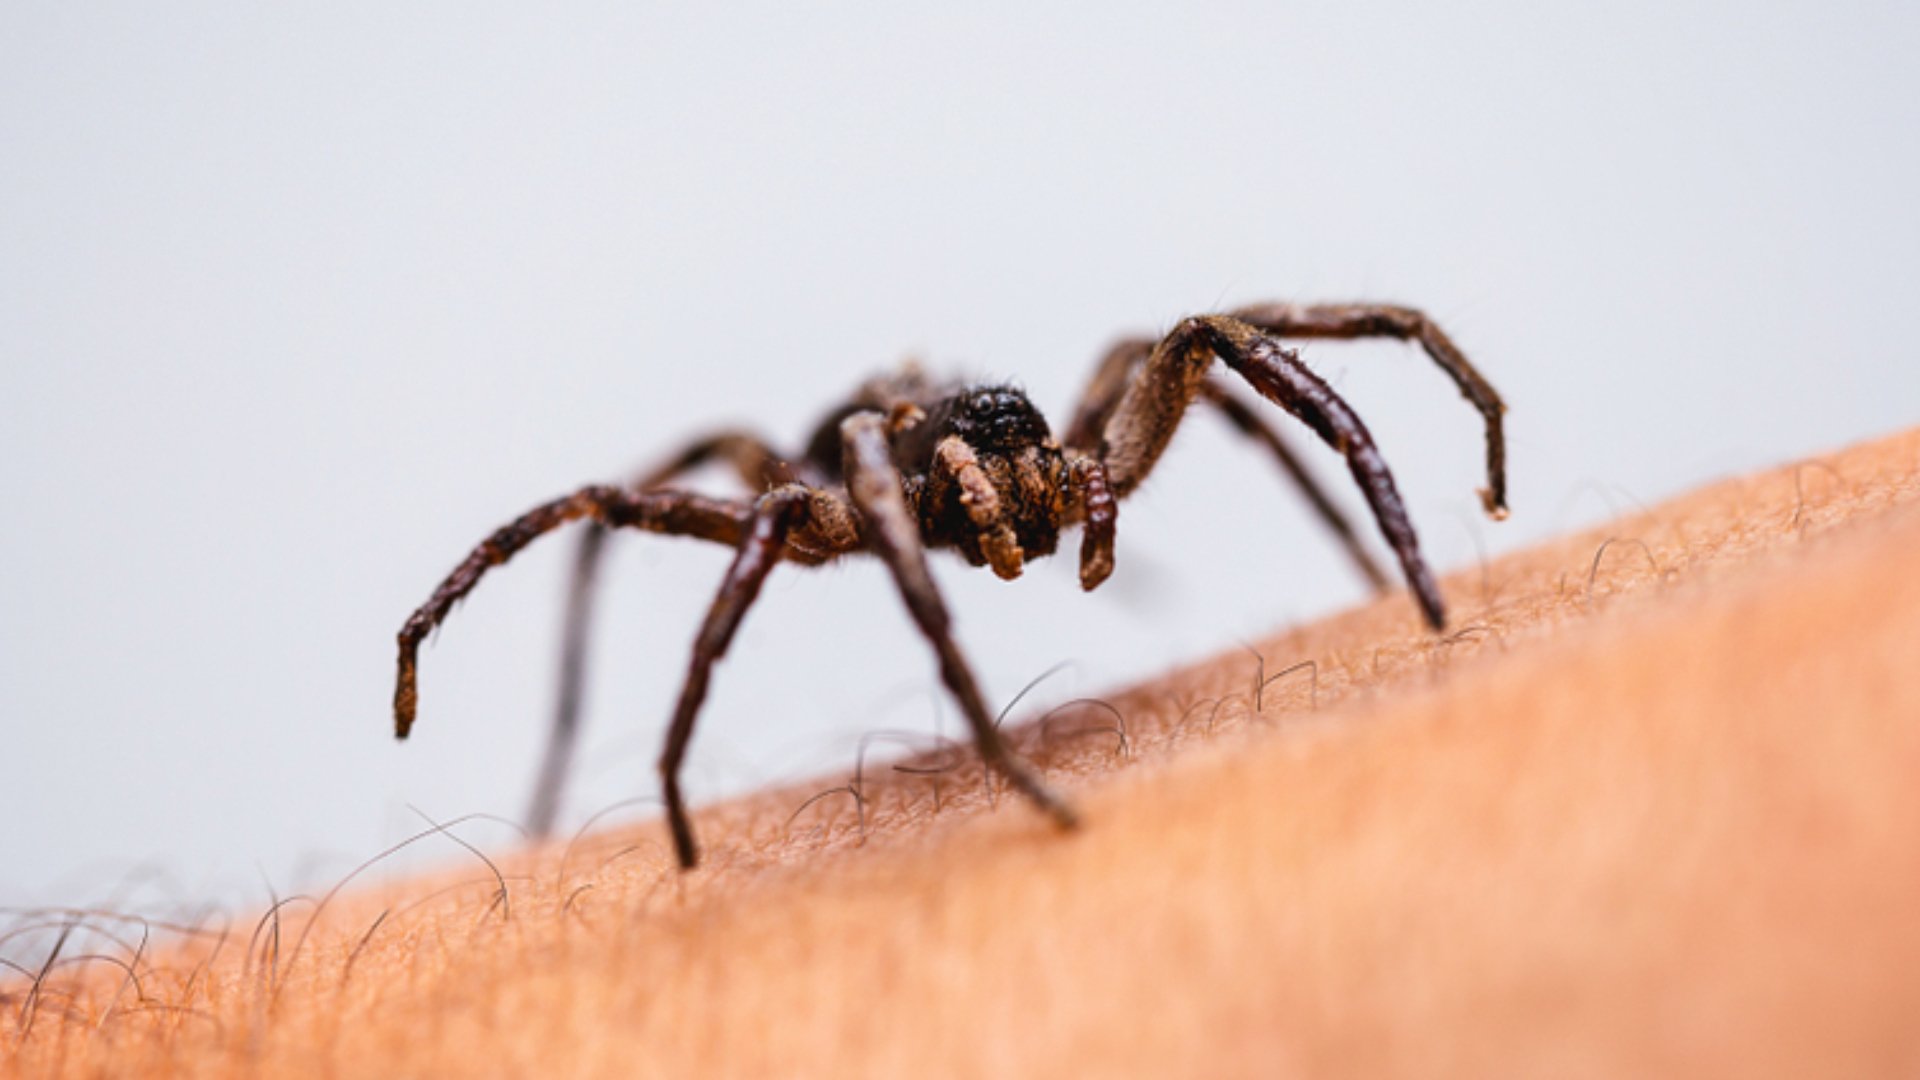 Find Reliable Spider Control Service Near You